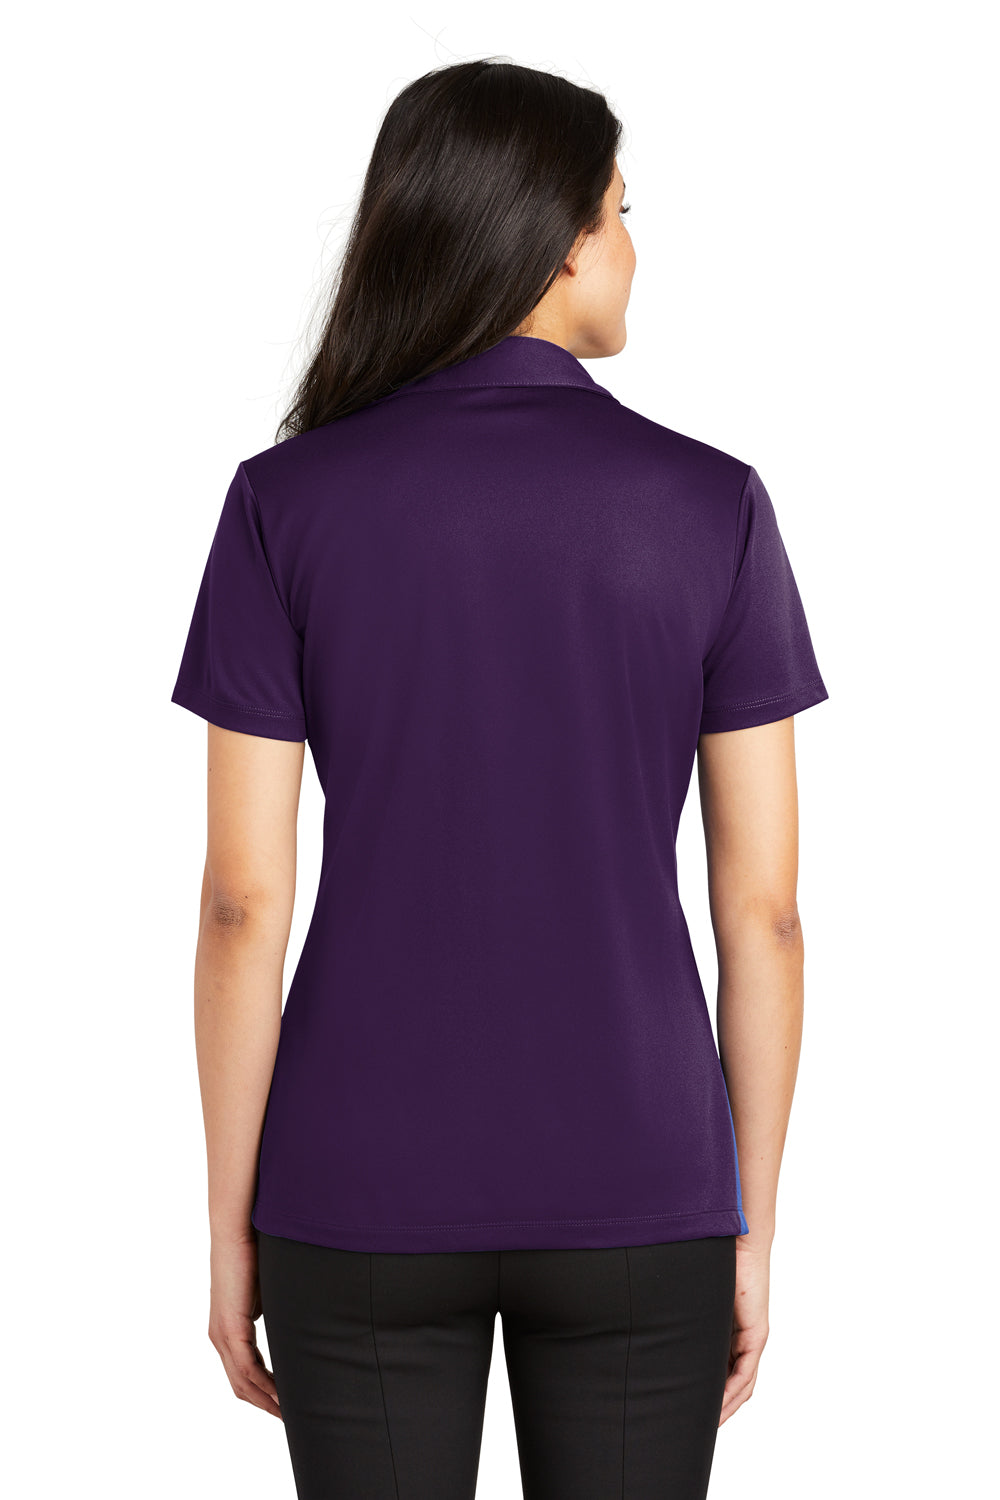 Port Authority L540 Womens Silk Touch Performance Moisture Wicking Short Sleeve Polo Shirt Purple Back